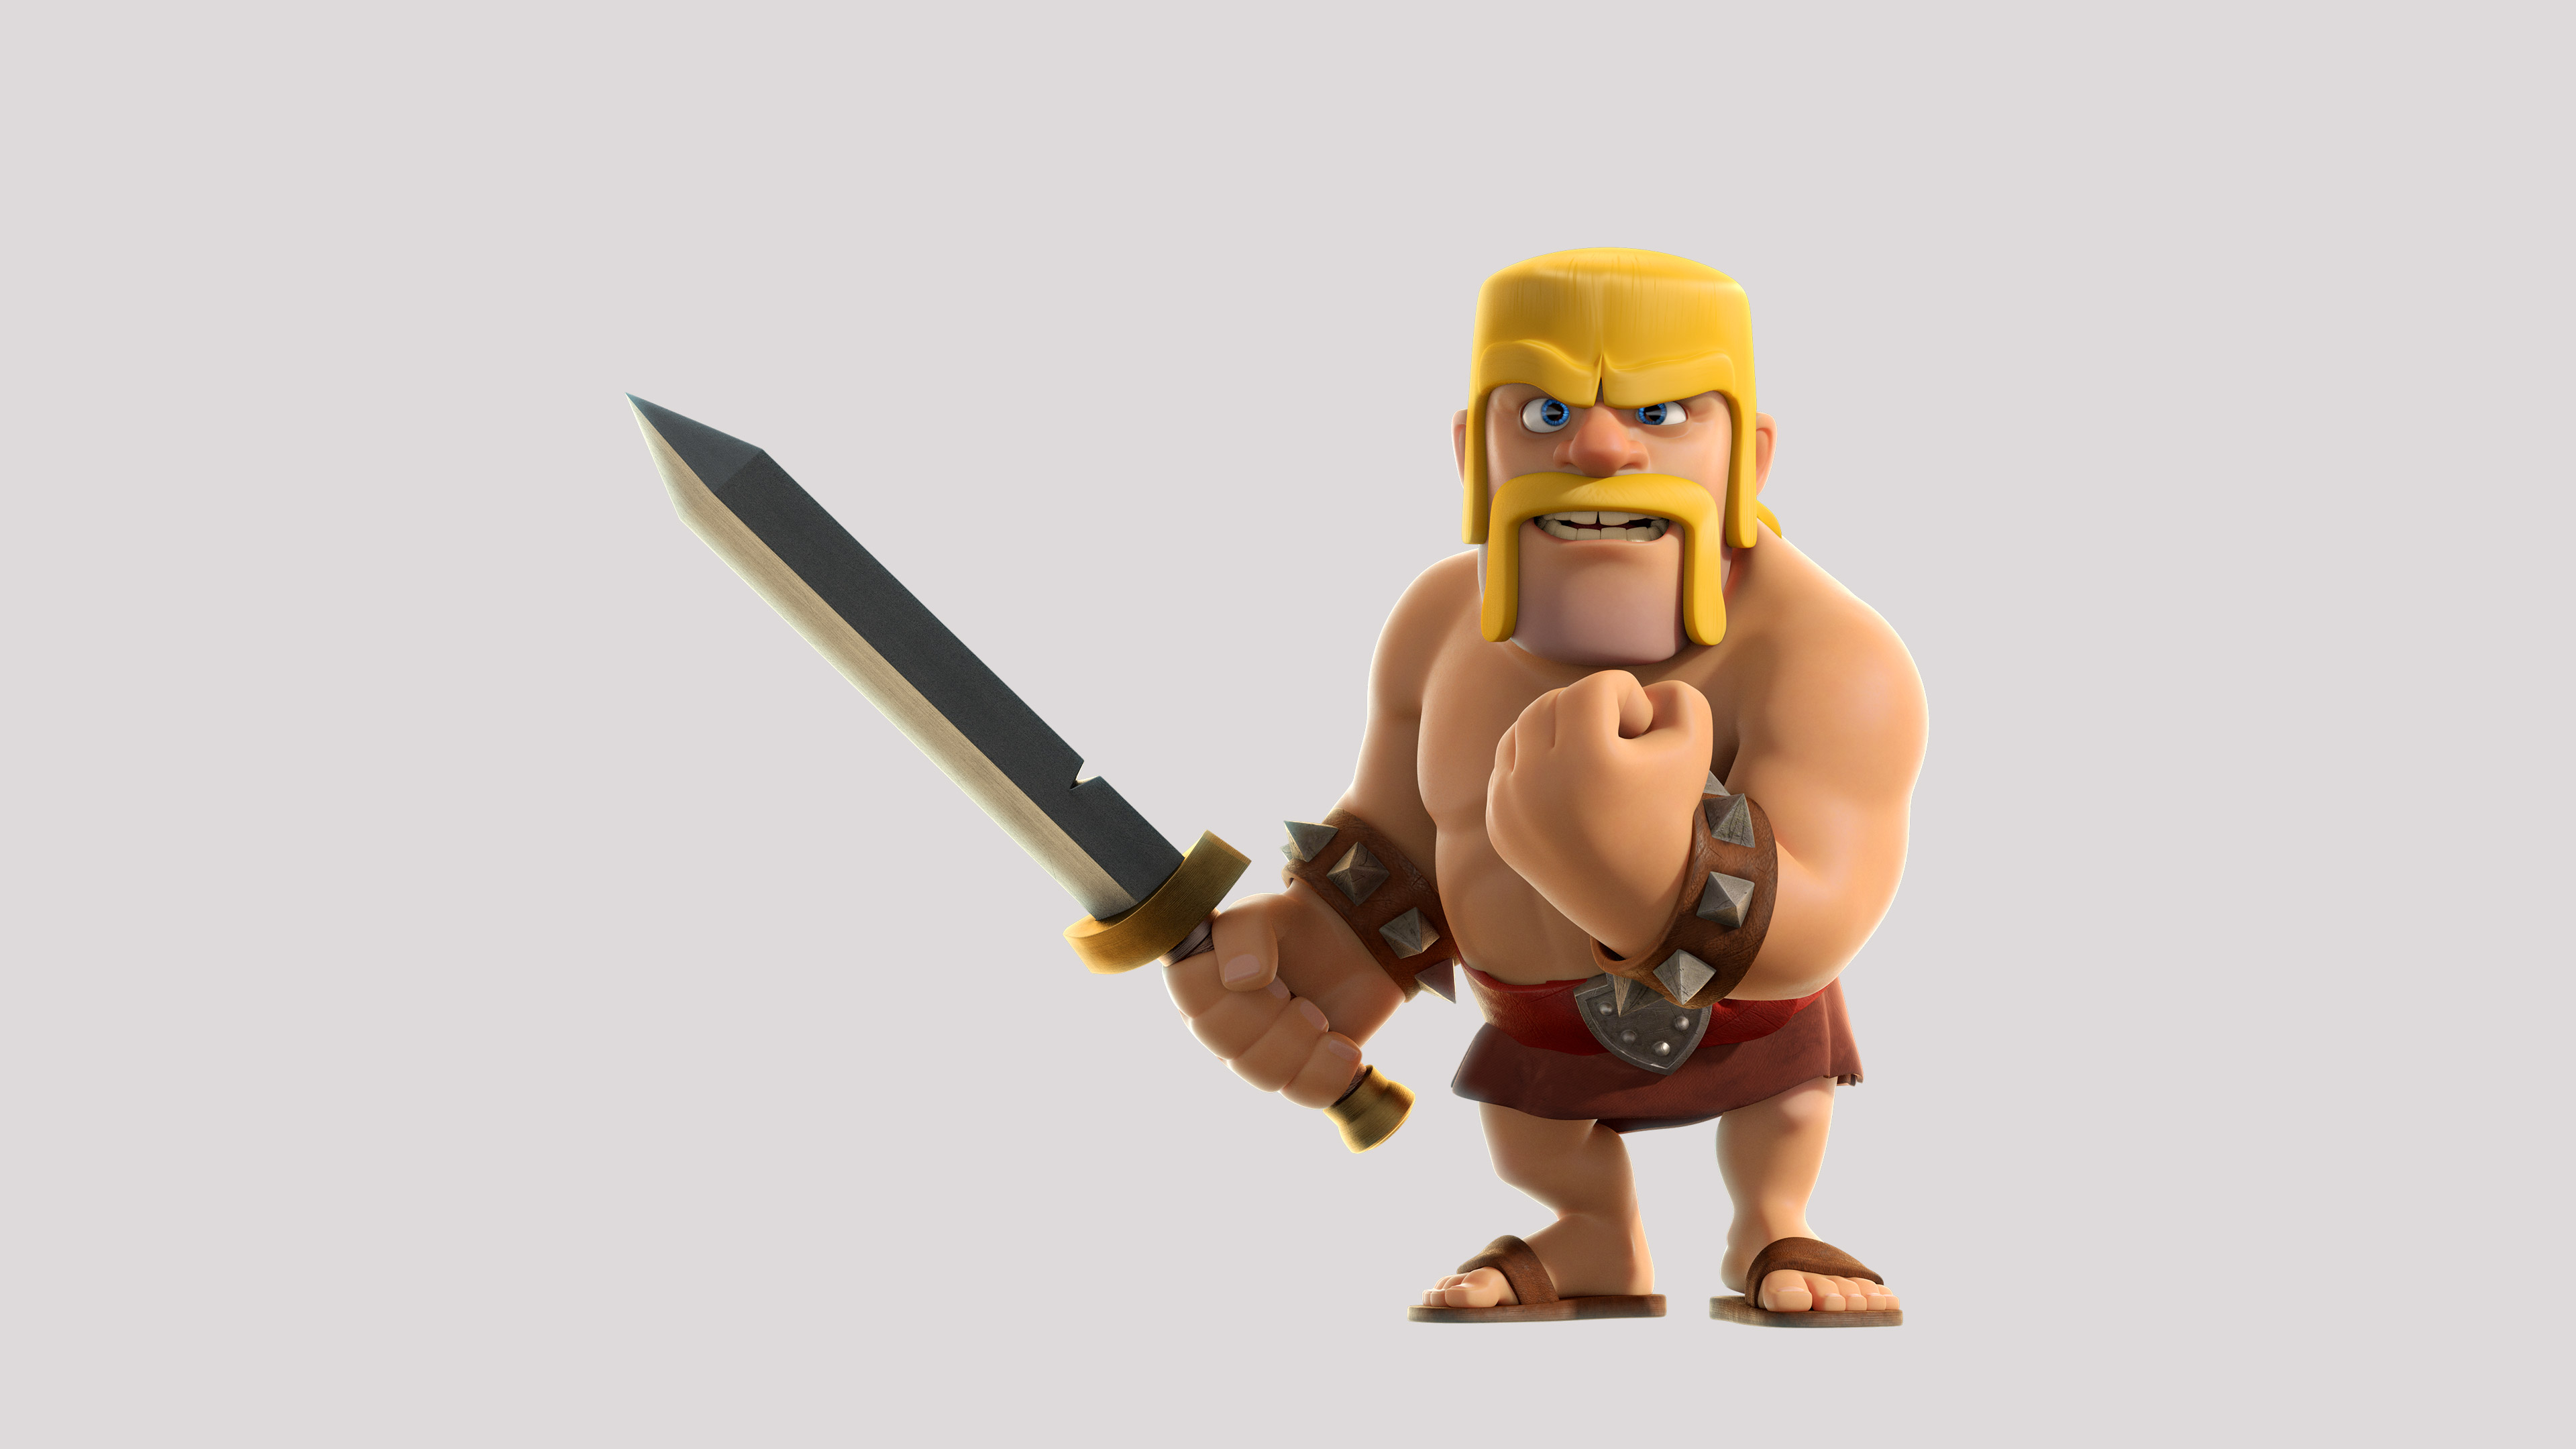 Barbarian (Clash Of Clans) Images. 